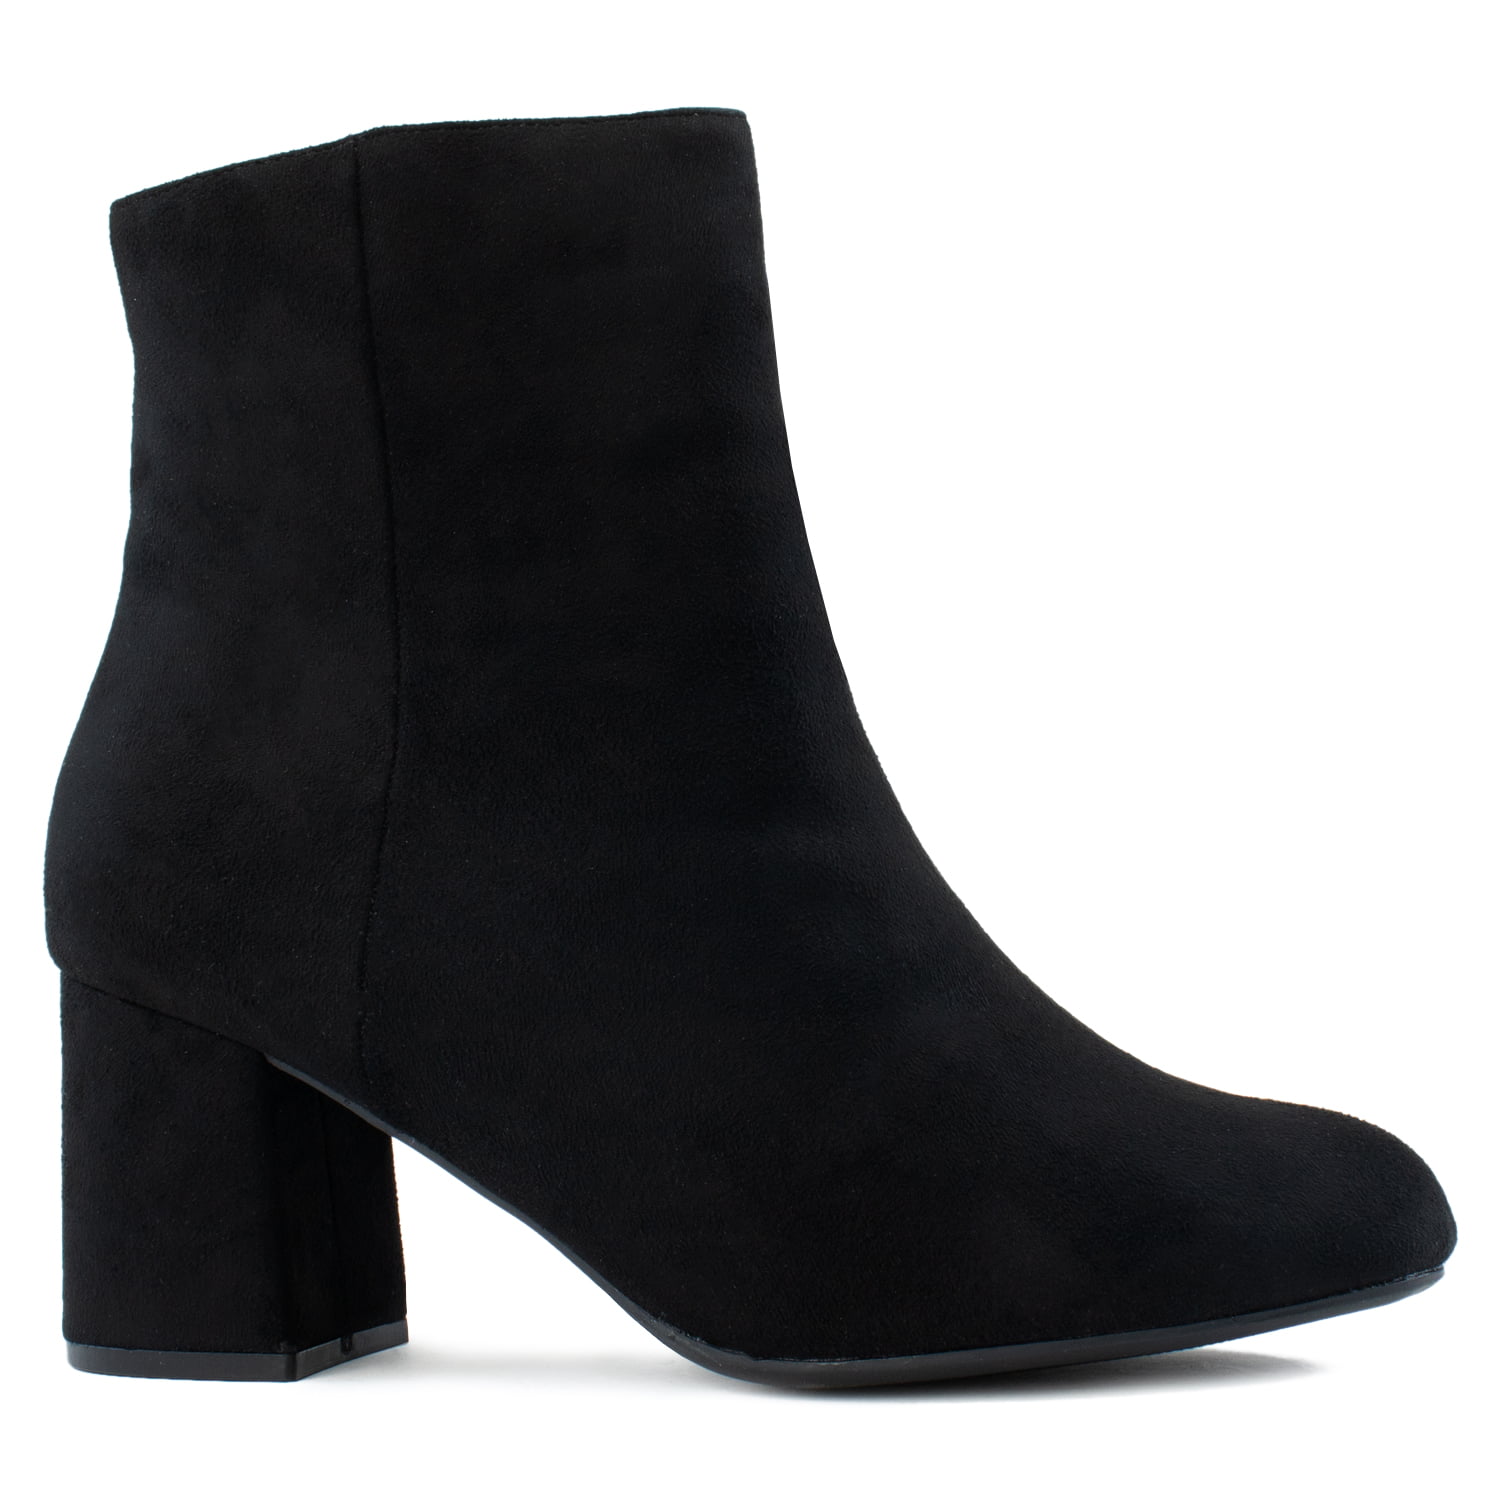 11 wide ankle boots